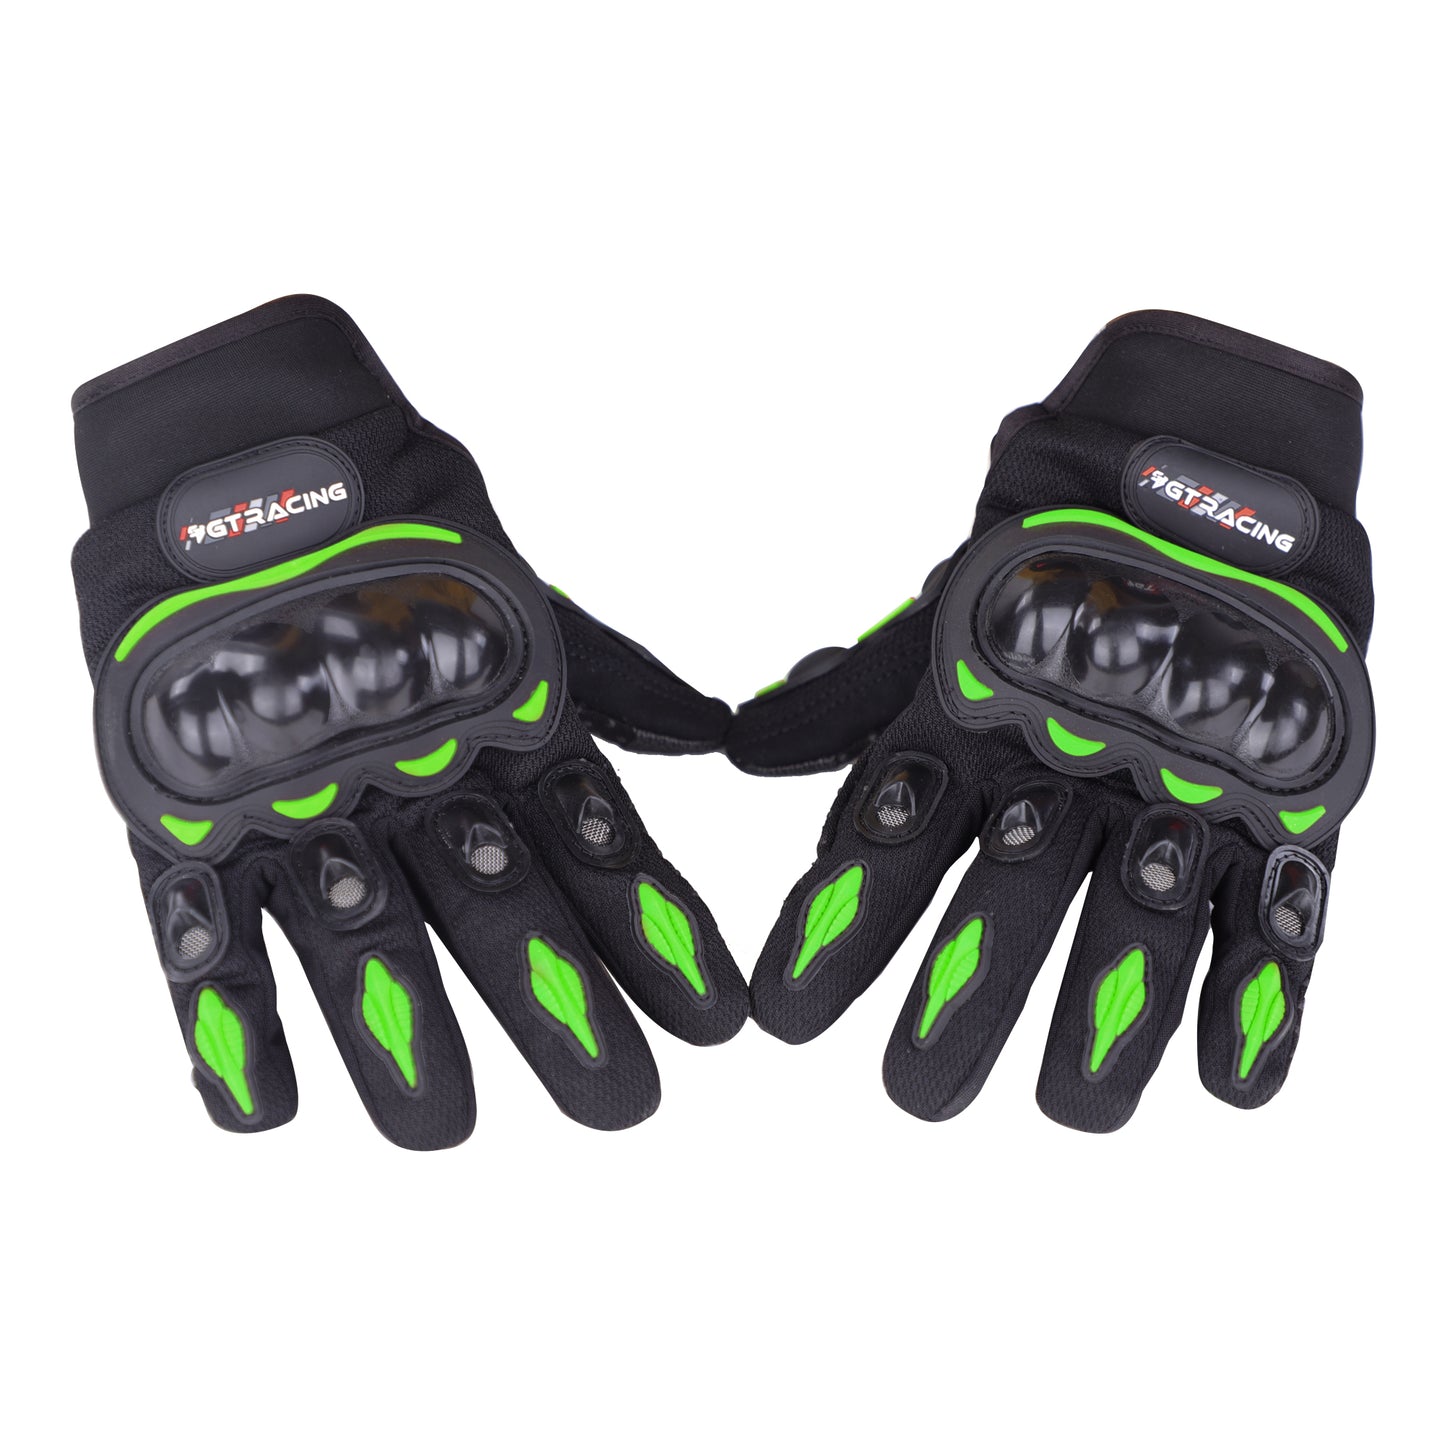 Steelbird GT-01 Full Finger Bike Riding Gloves with Touch Screen Sensitivity at Thumb and Index Finger, Protective Off-Road Motorbike Racing (Green)